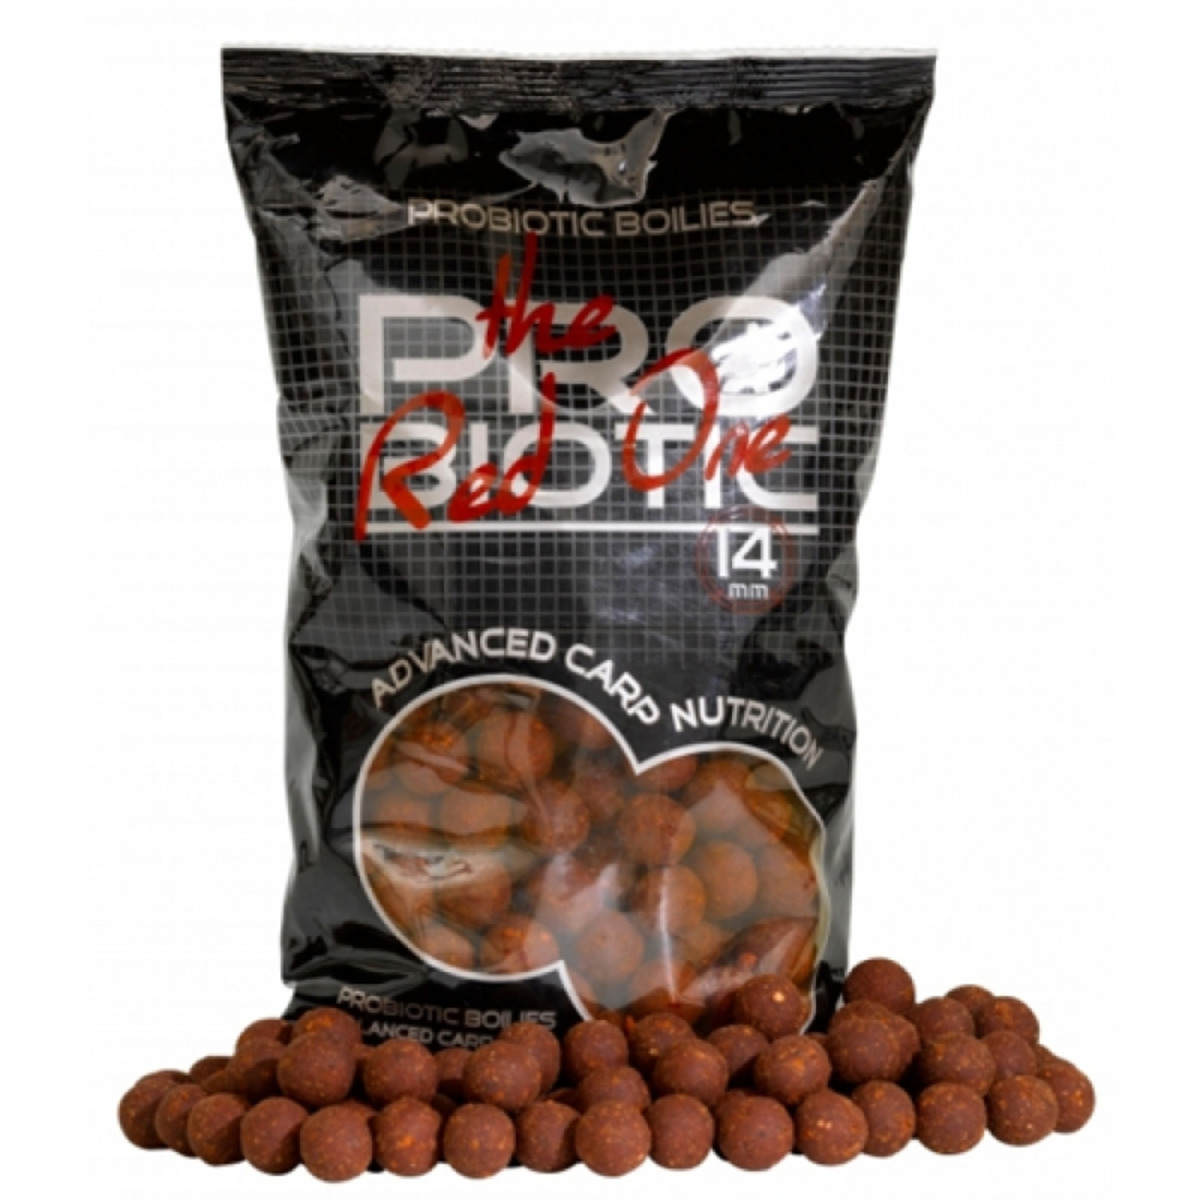 Starbaits Probiotic Boilies The Red One - 14 mm  - 1 kg